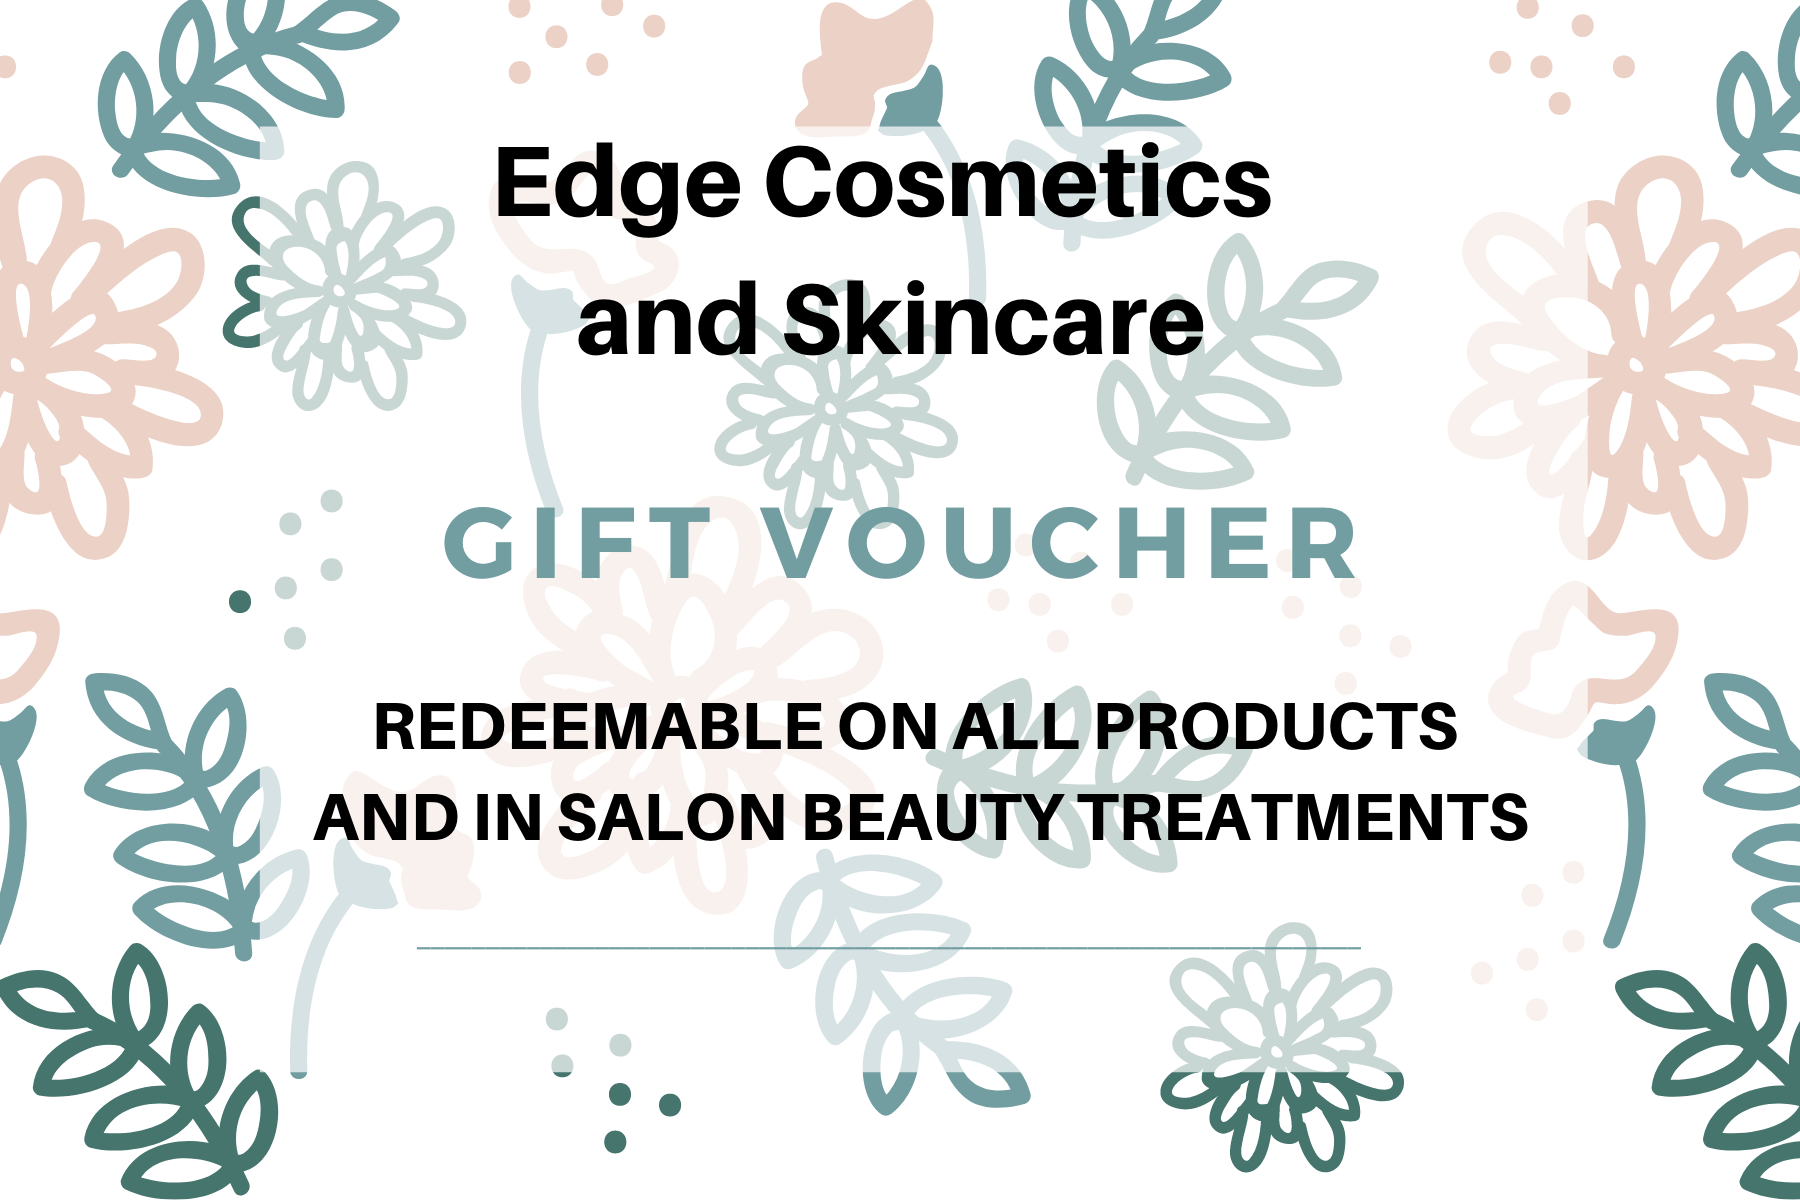 Edge Cosmetics and Skincare GIFT VOUCHER